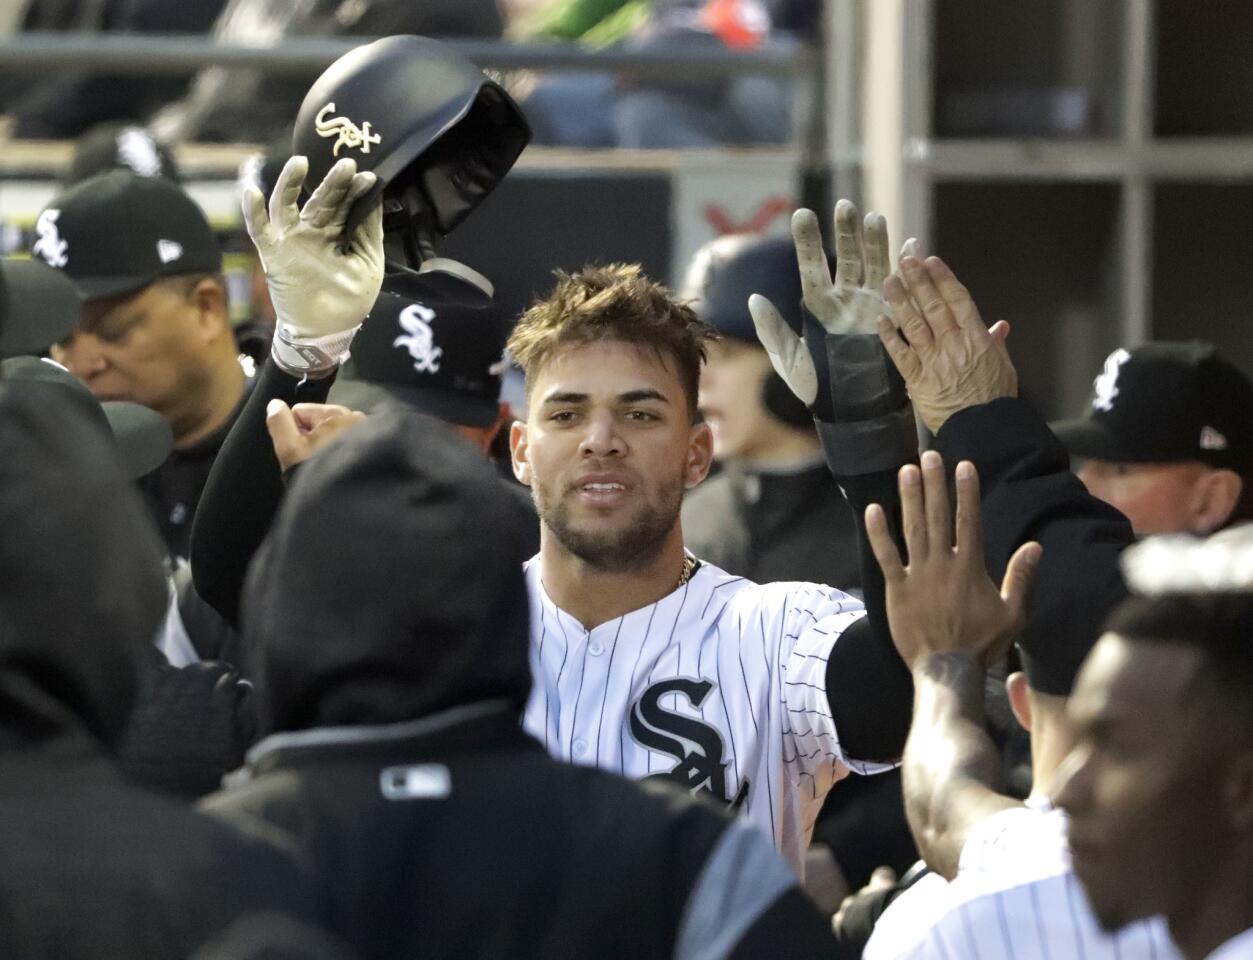 White Sox second baseman Yoan Moncada celebrates in the dugout after scoring on a hit by Avisail Garcia during the first inning against the Mariners, Monday, April 23, 2018.